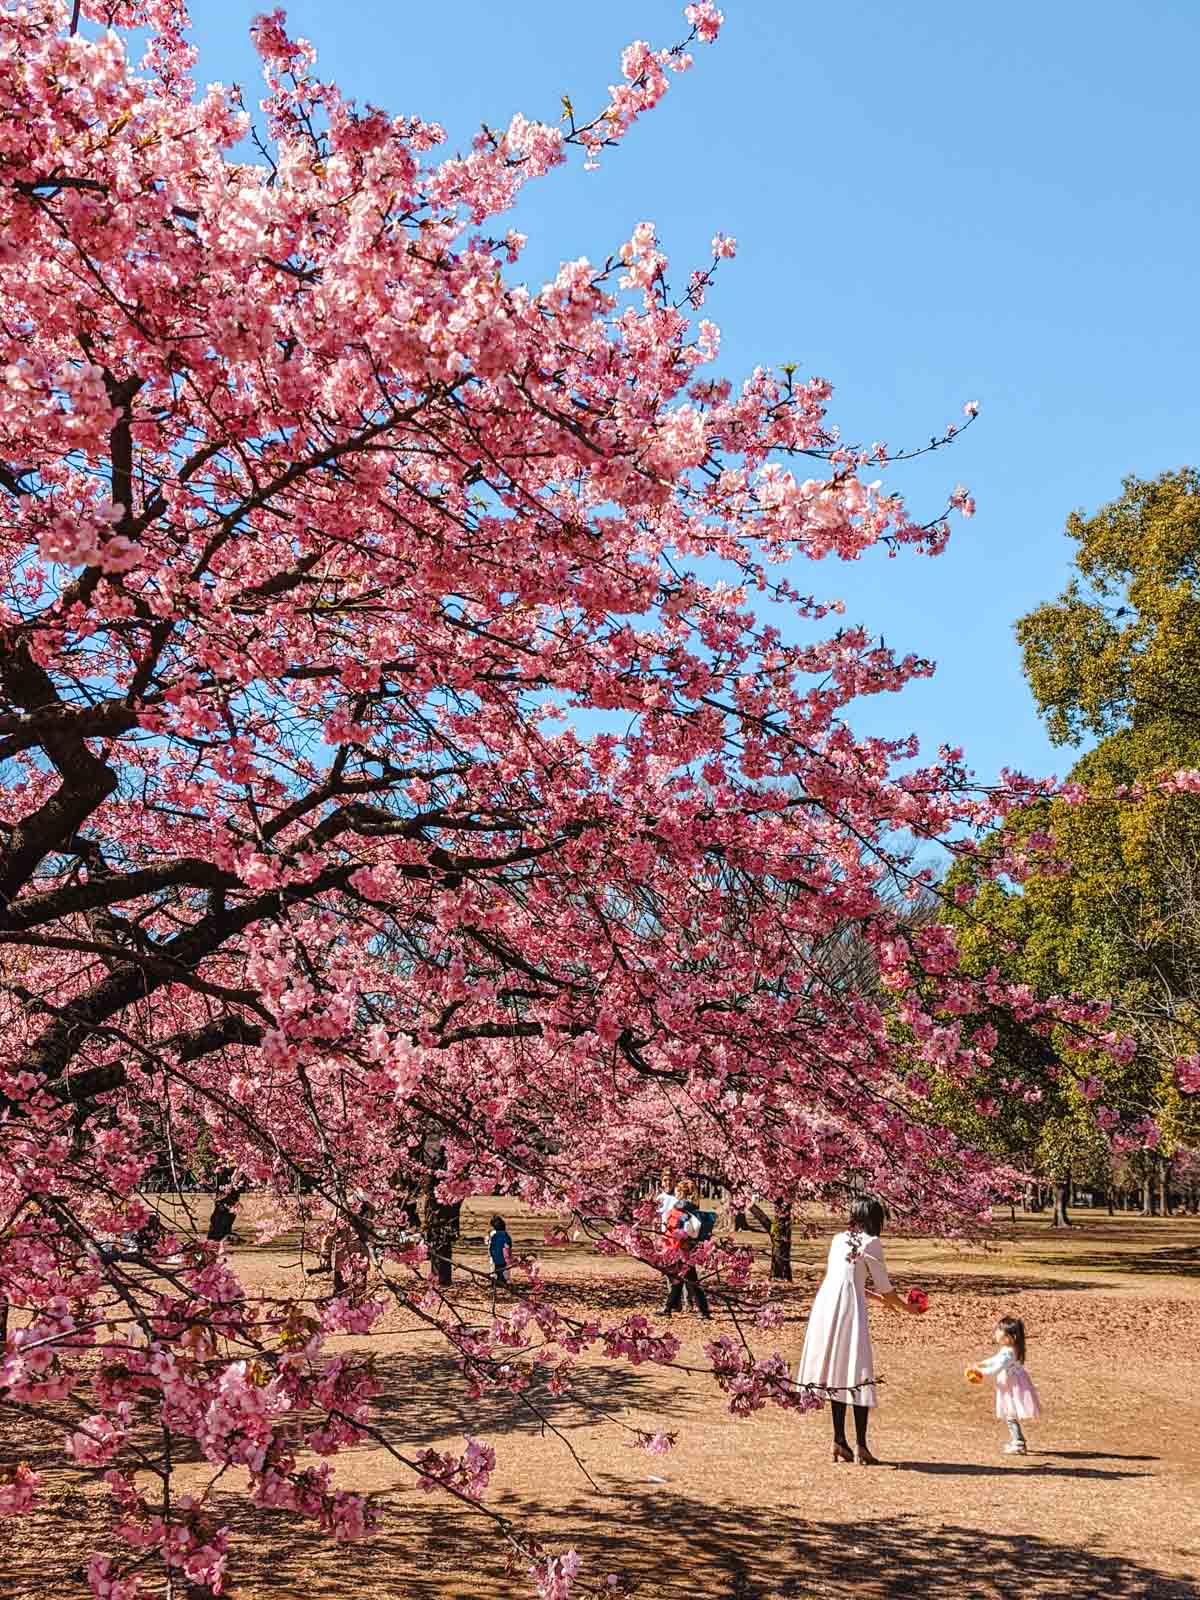 Large cherry blossom tree in Yoyogi Park with mother and daughter playing catch in background.